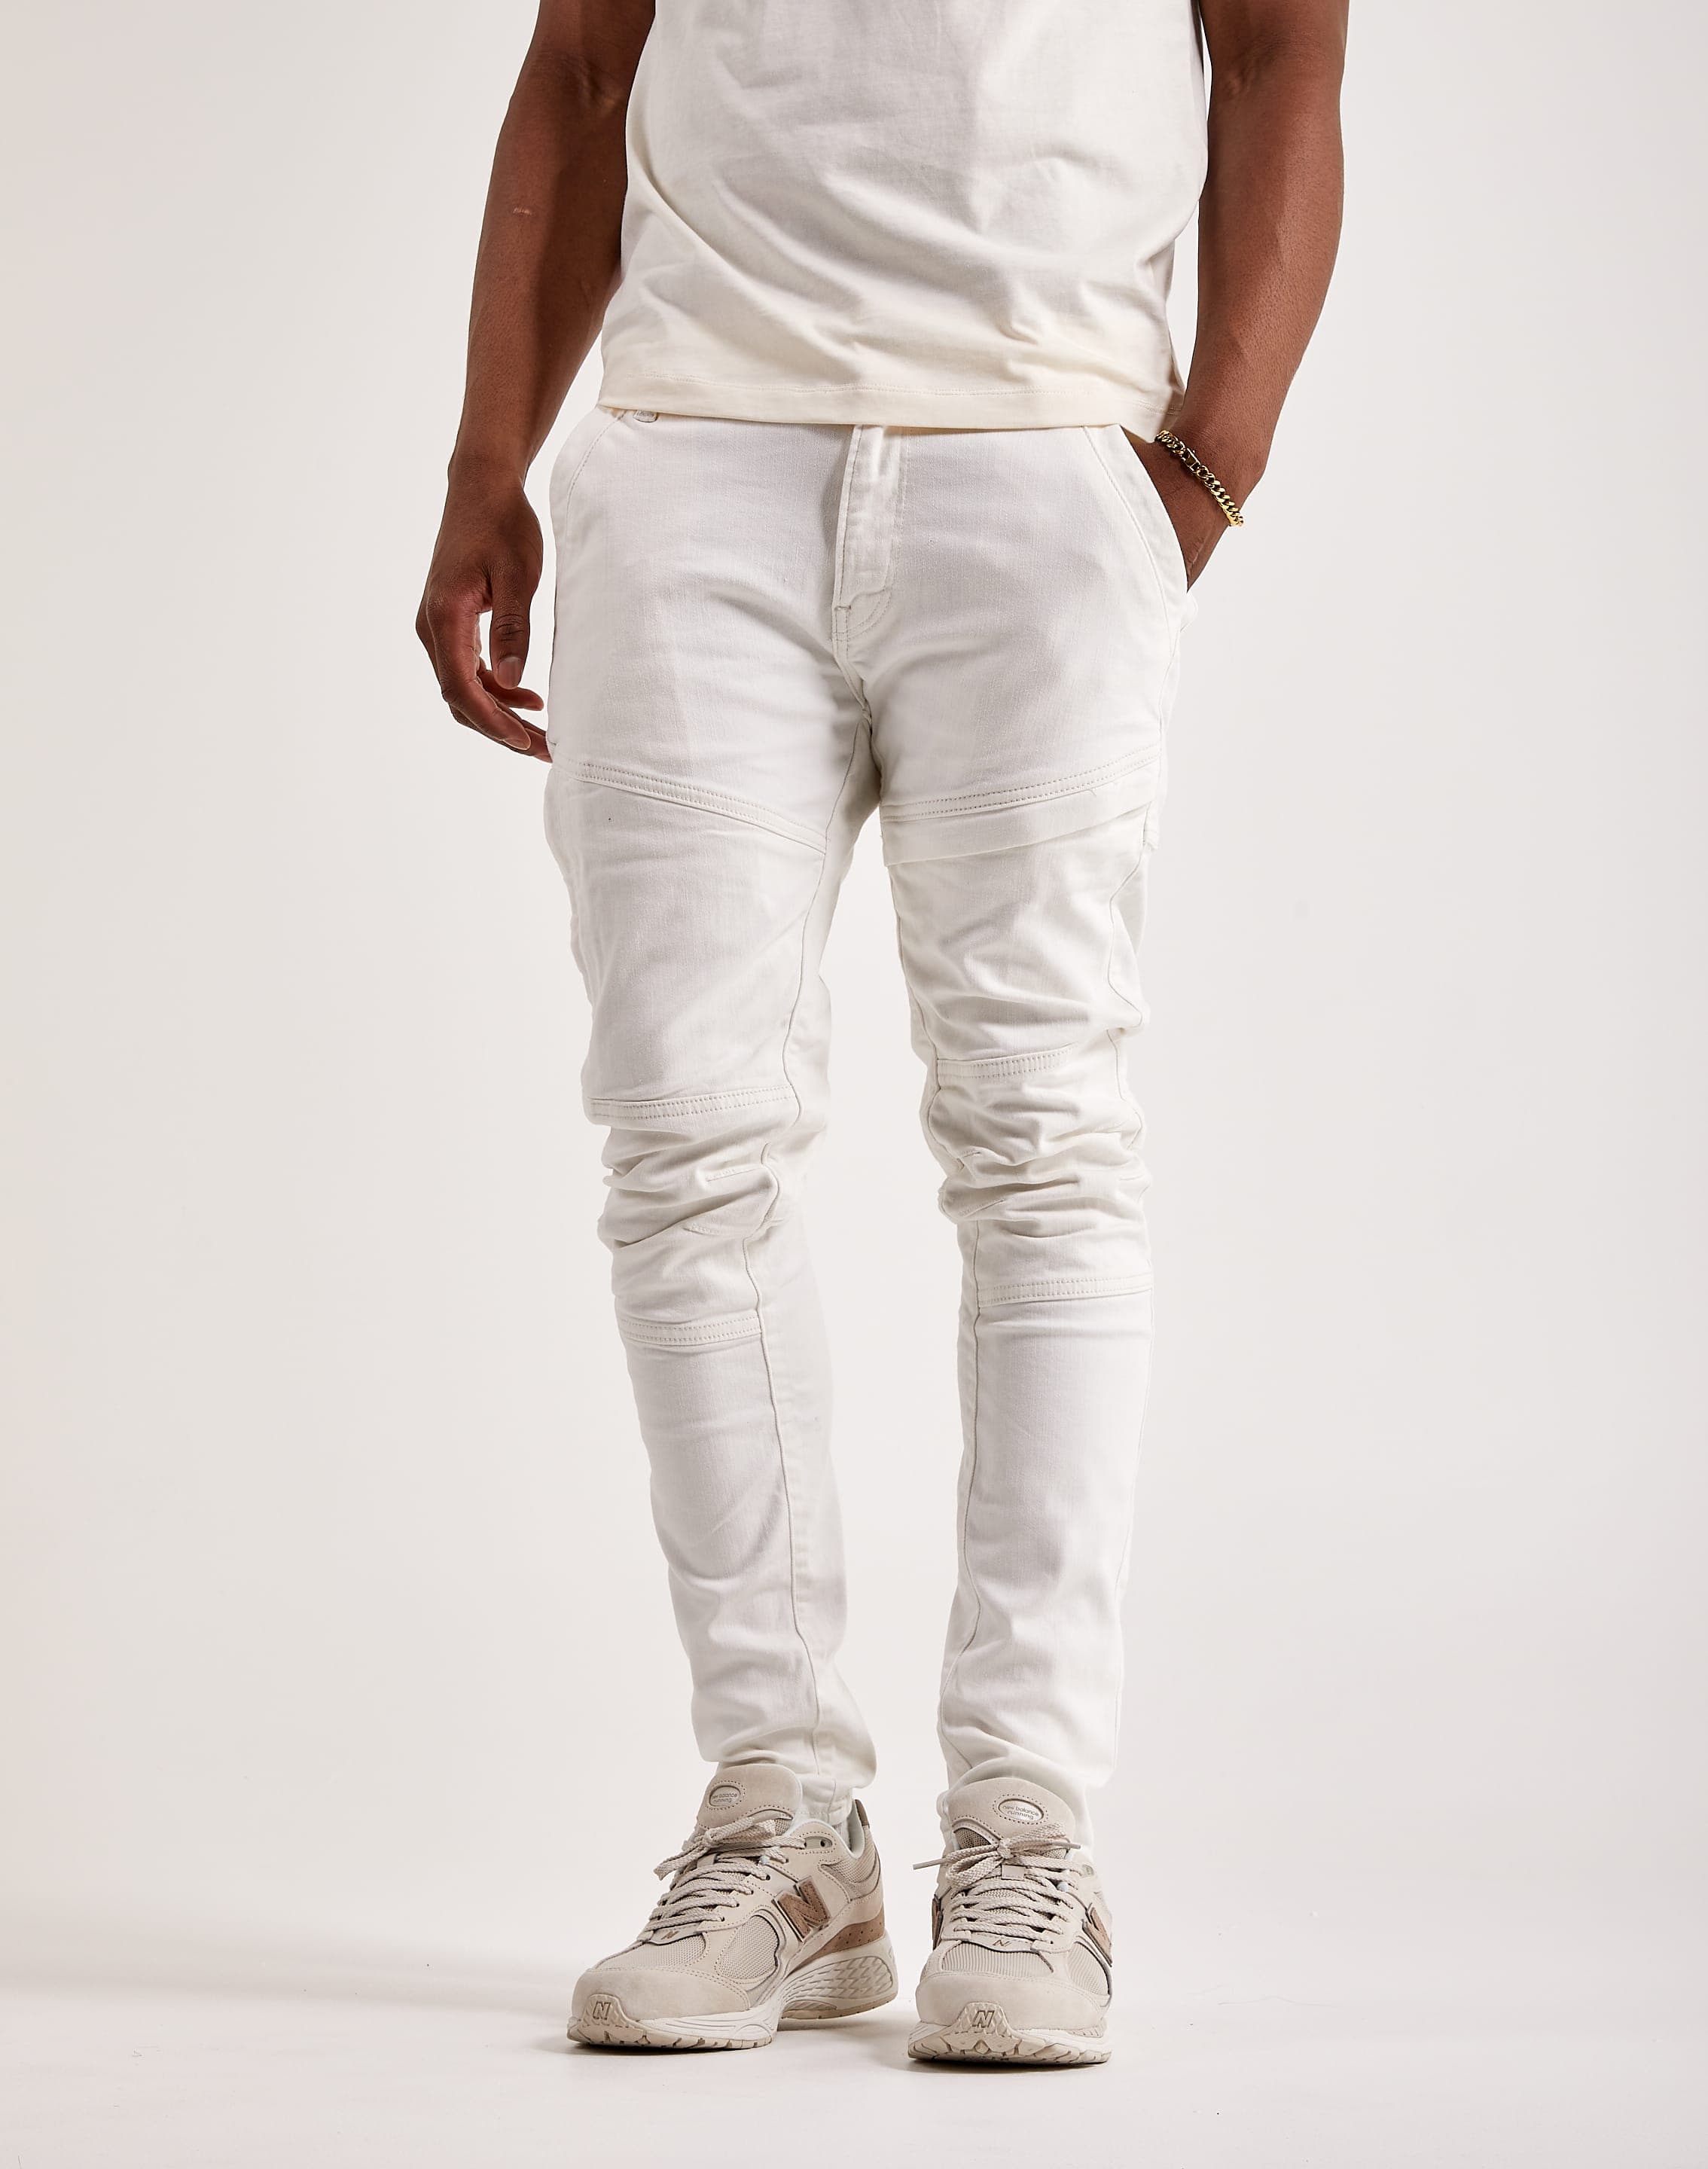 Cute White Jeans - Skinny Jeans - Frayed Hems - High Rise Pants - Lulus